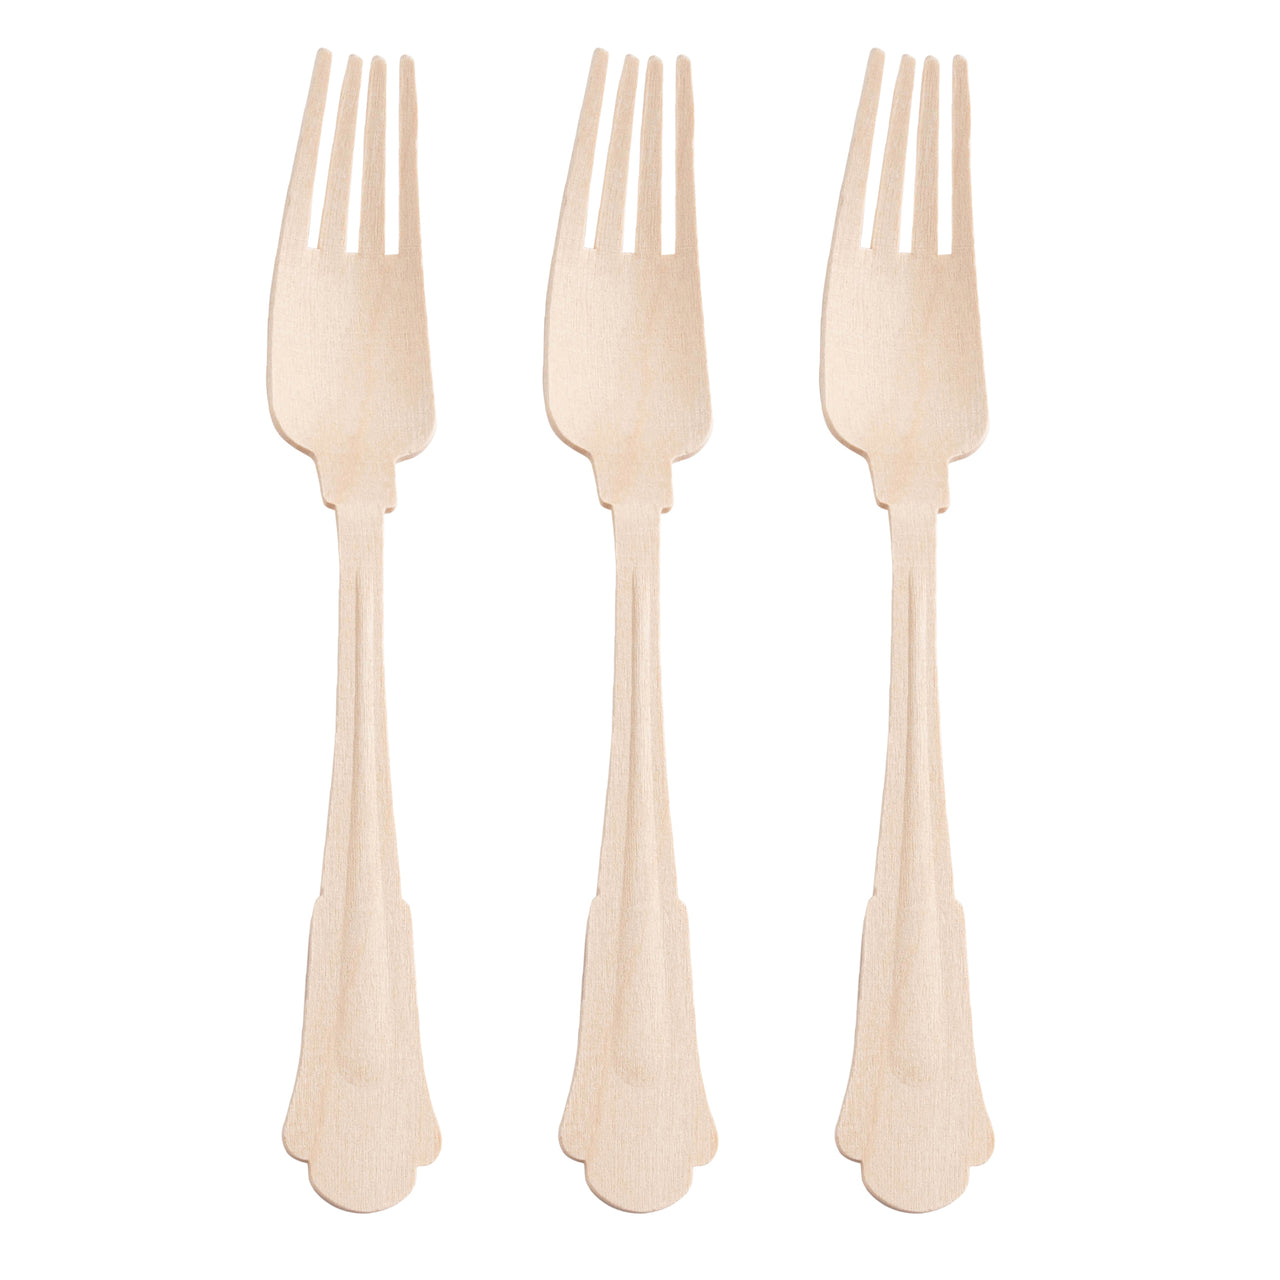 Silhouette Birch Wood Eco Friendly Disposable Dinner Forks